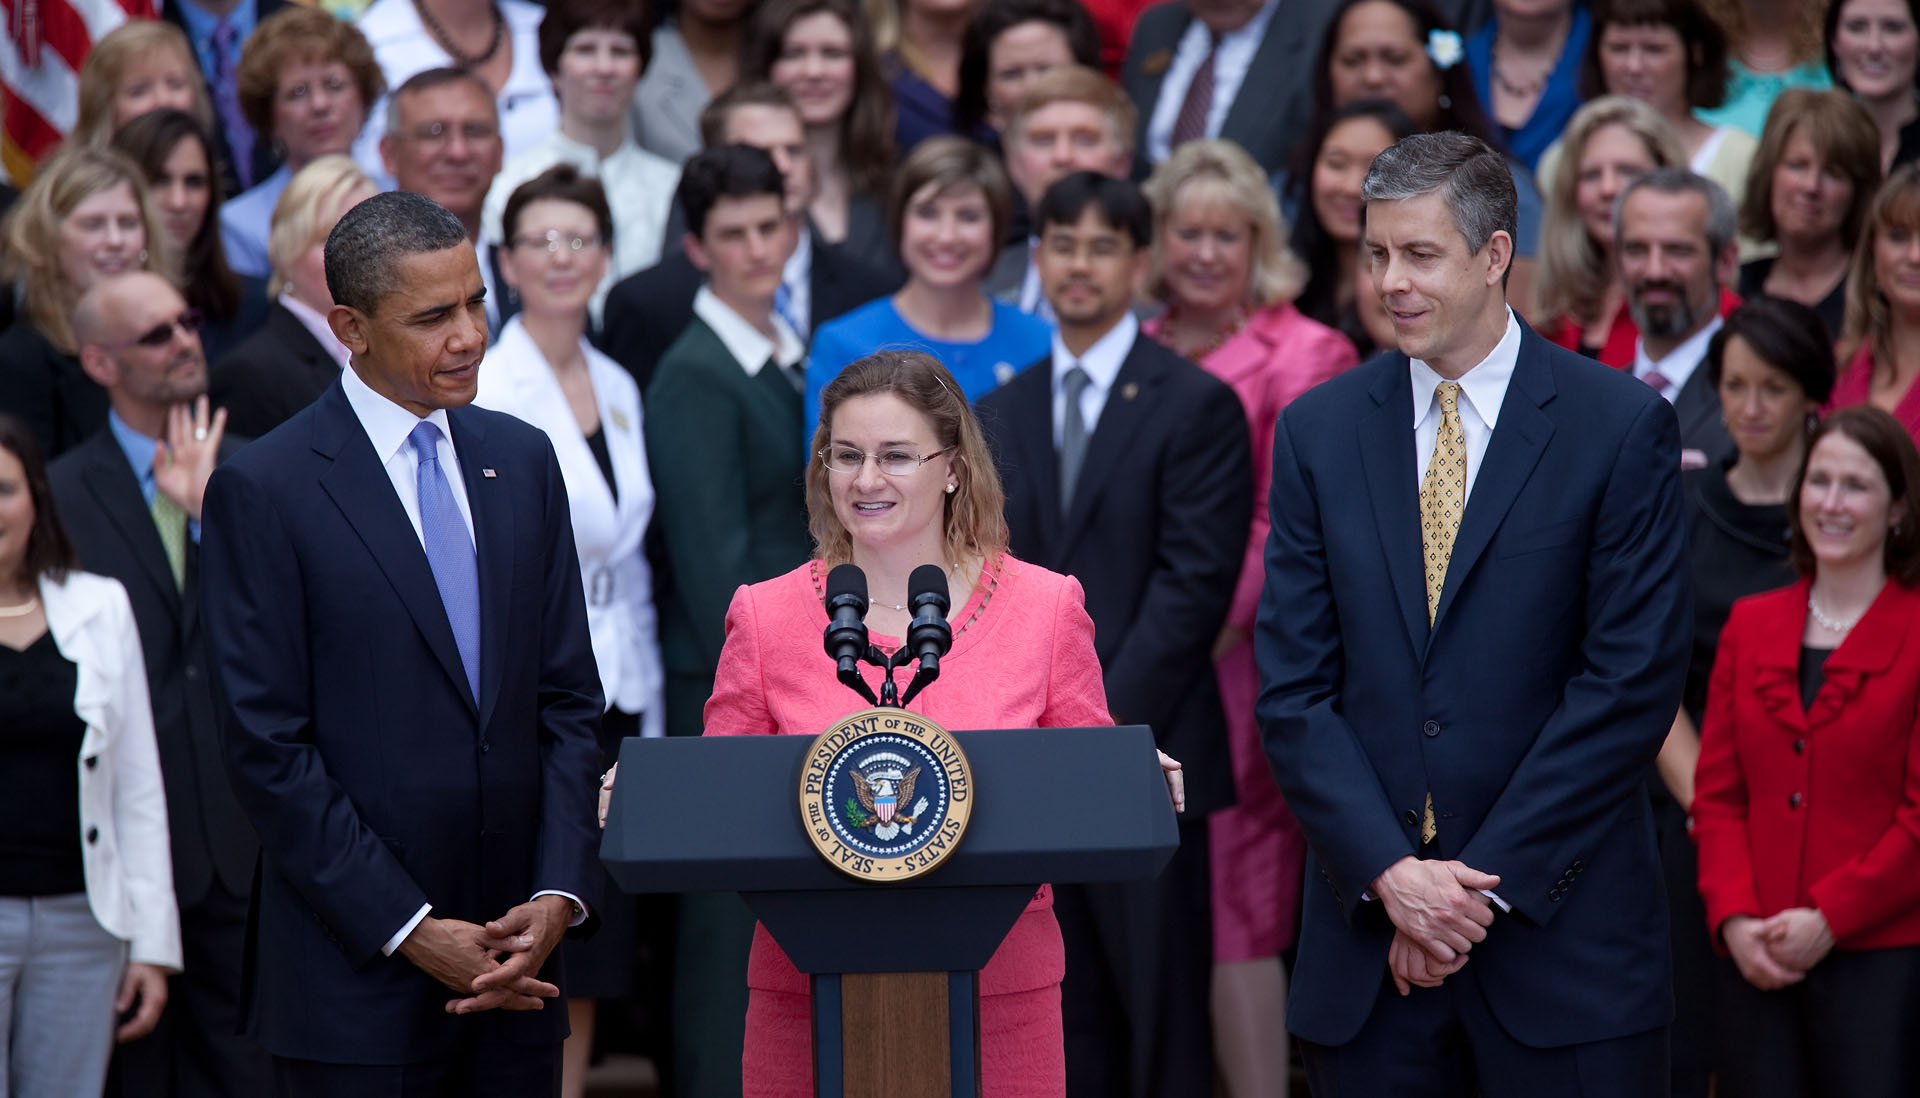 Teacher of the Year Recipient Michelle Shearer, with President Barack Obama and Education Secretary Arne Duncan